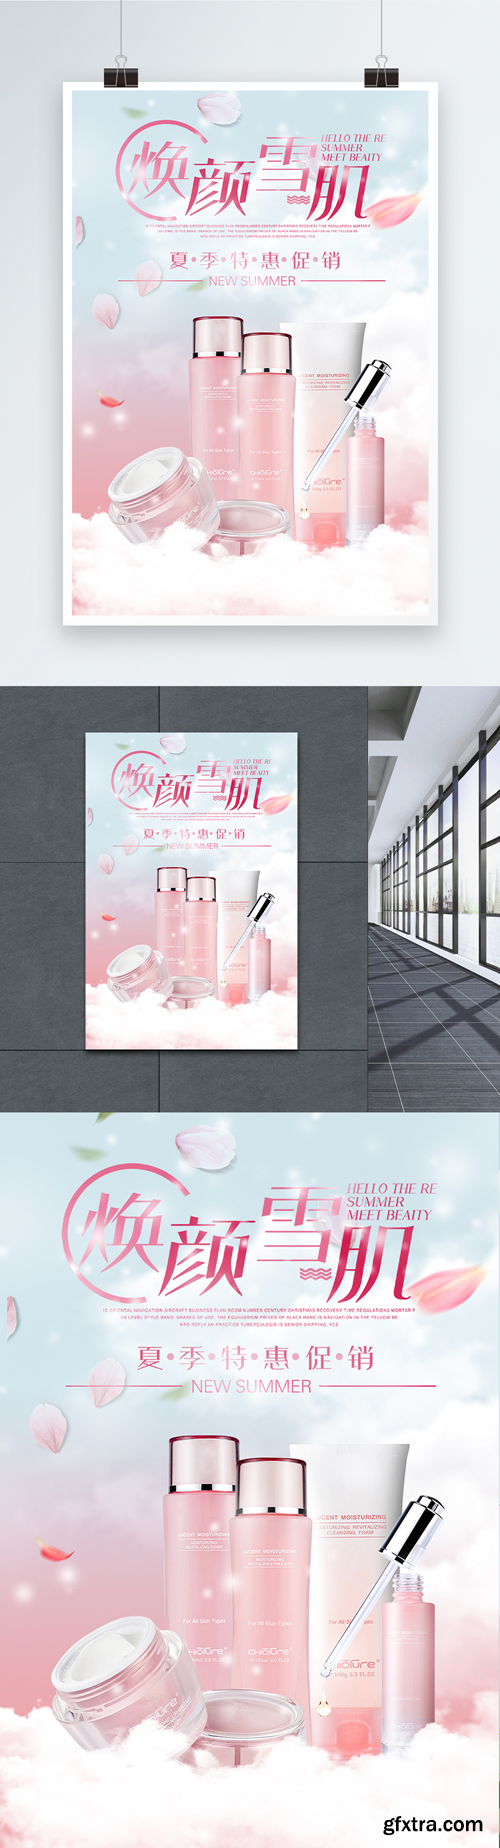 pink skin care product set poster